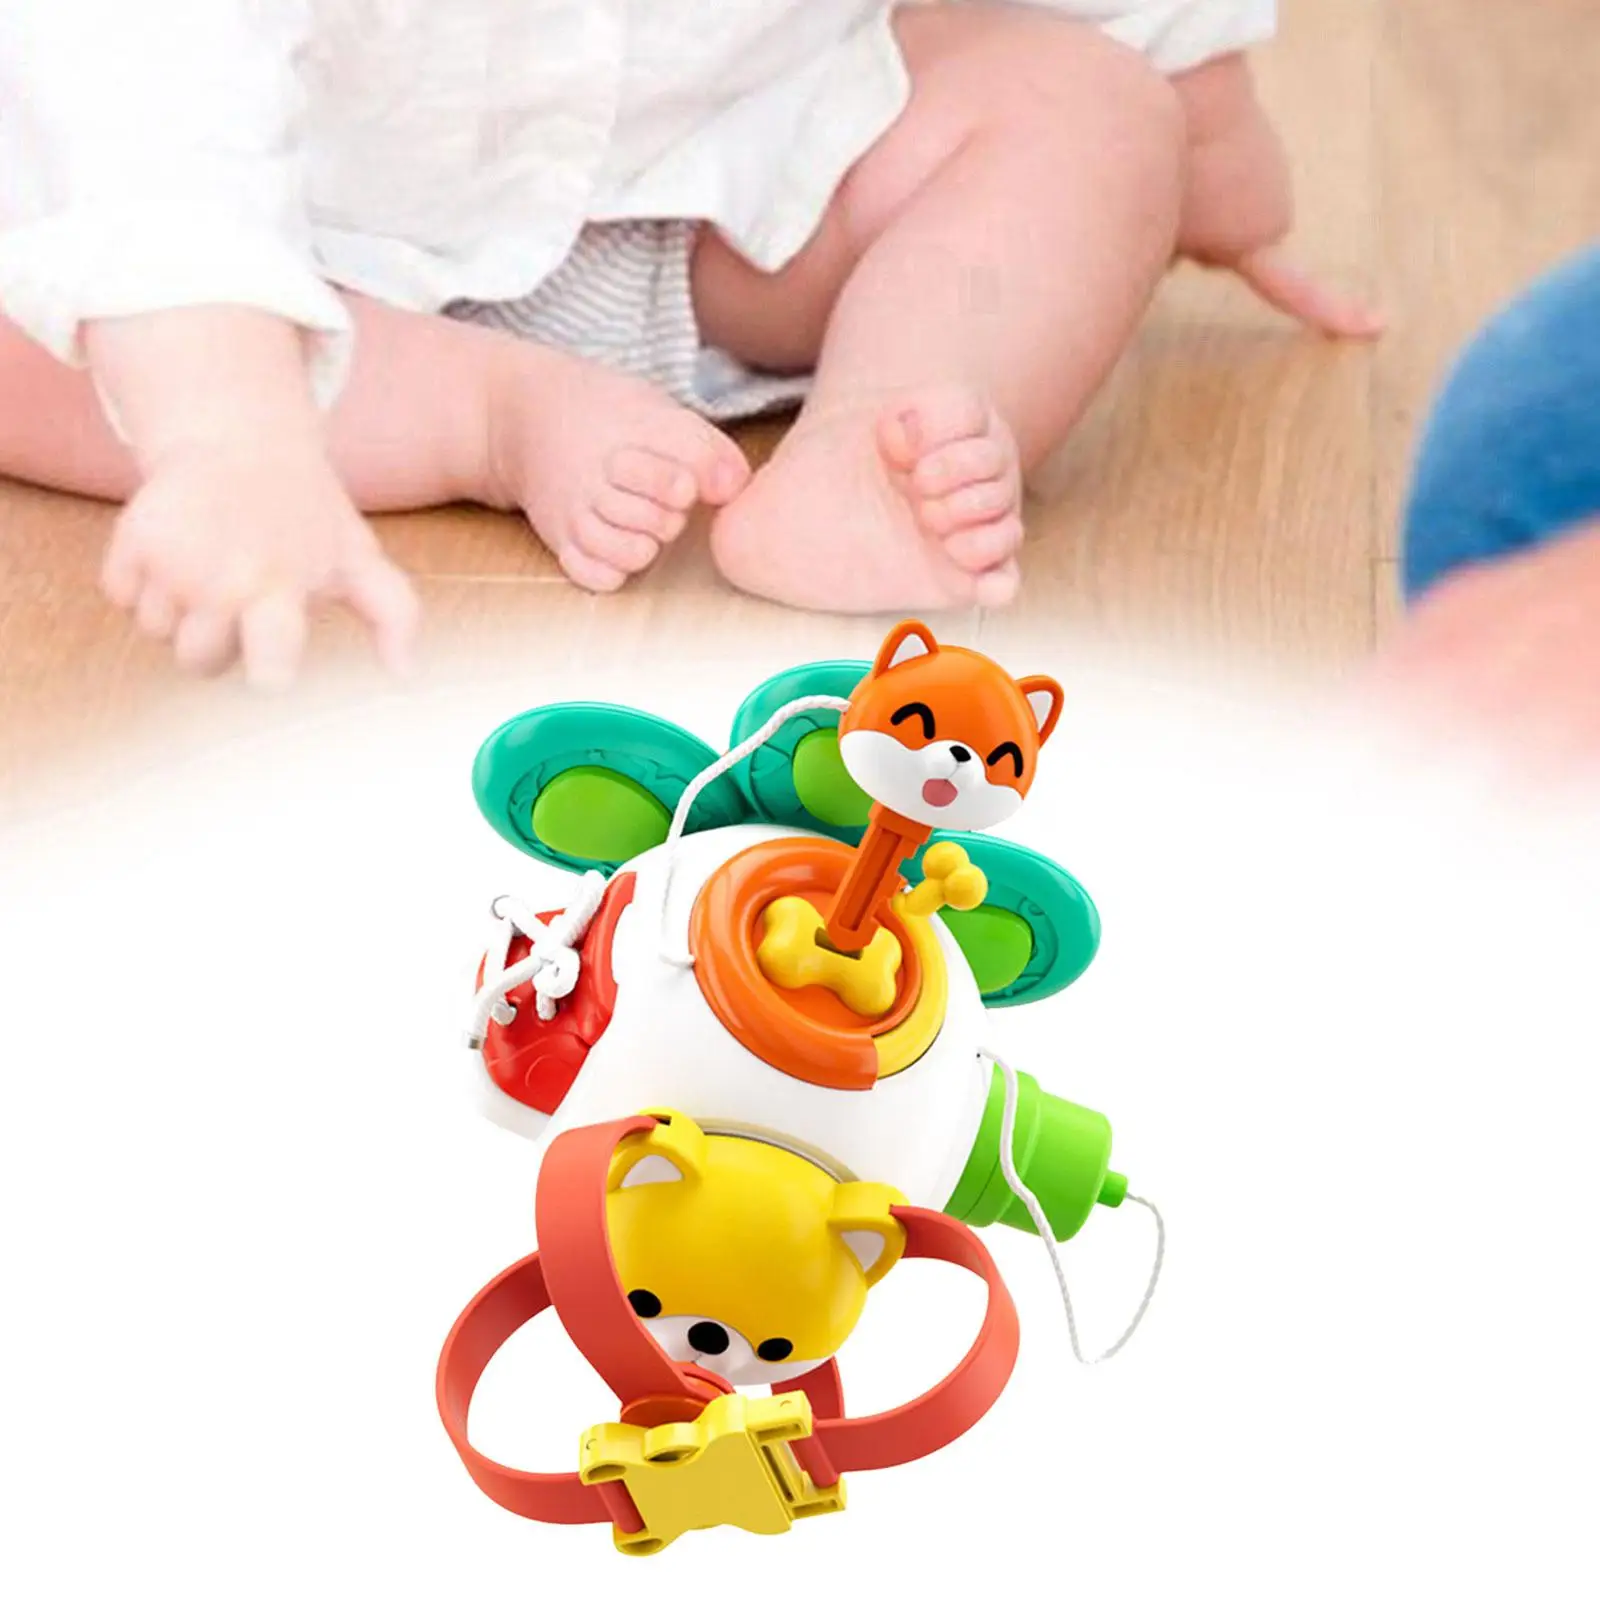 Baby Busy Ball Multifunctional Hand Grasping Ball for Early Developmental Color Recognition Fine Motor Skills Children Toddlers